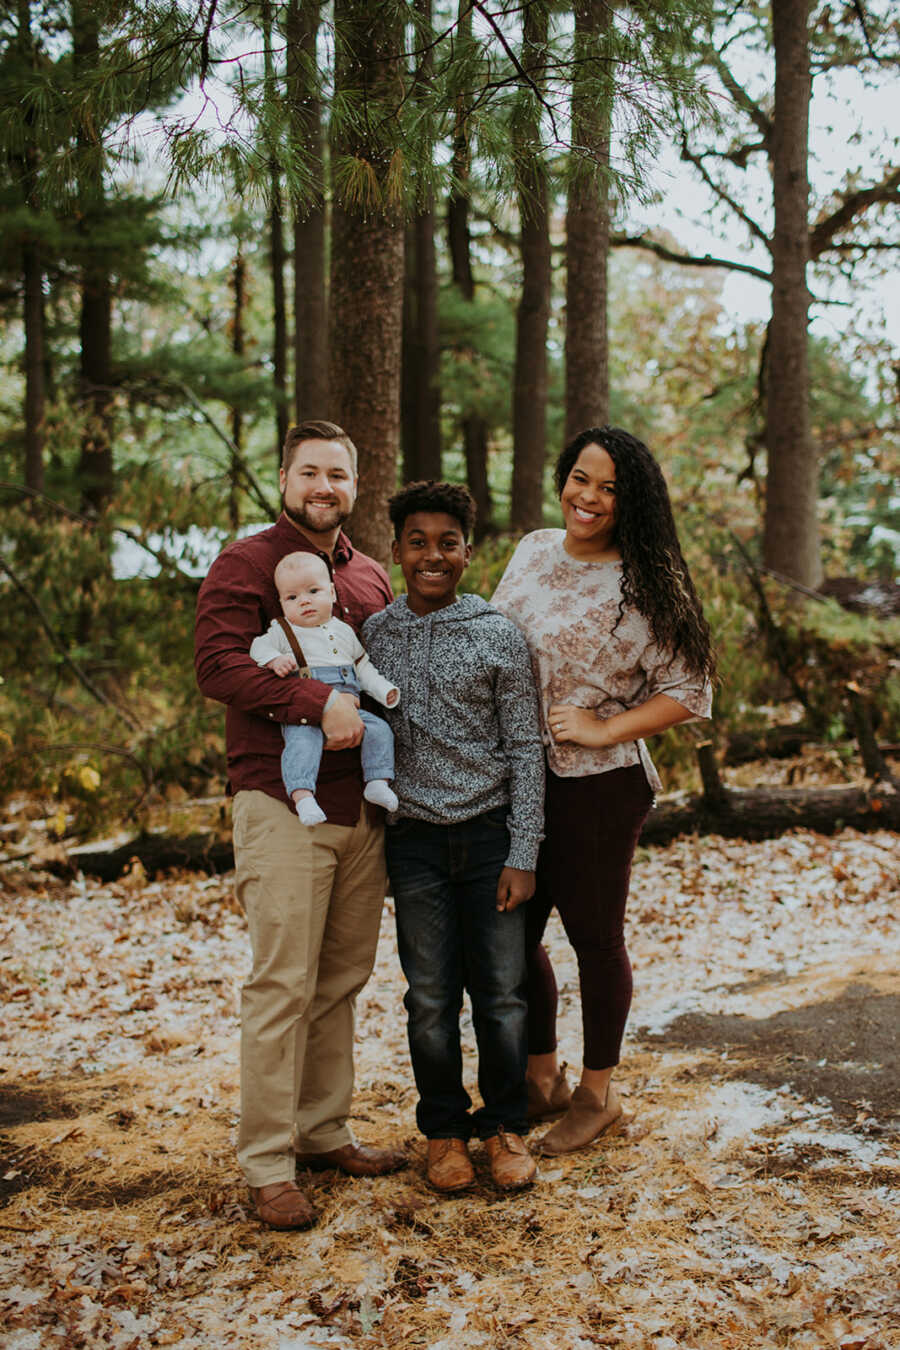 Blended family of four take photos together during the fall time